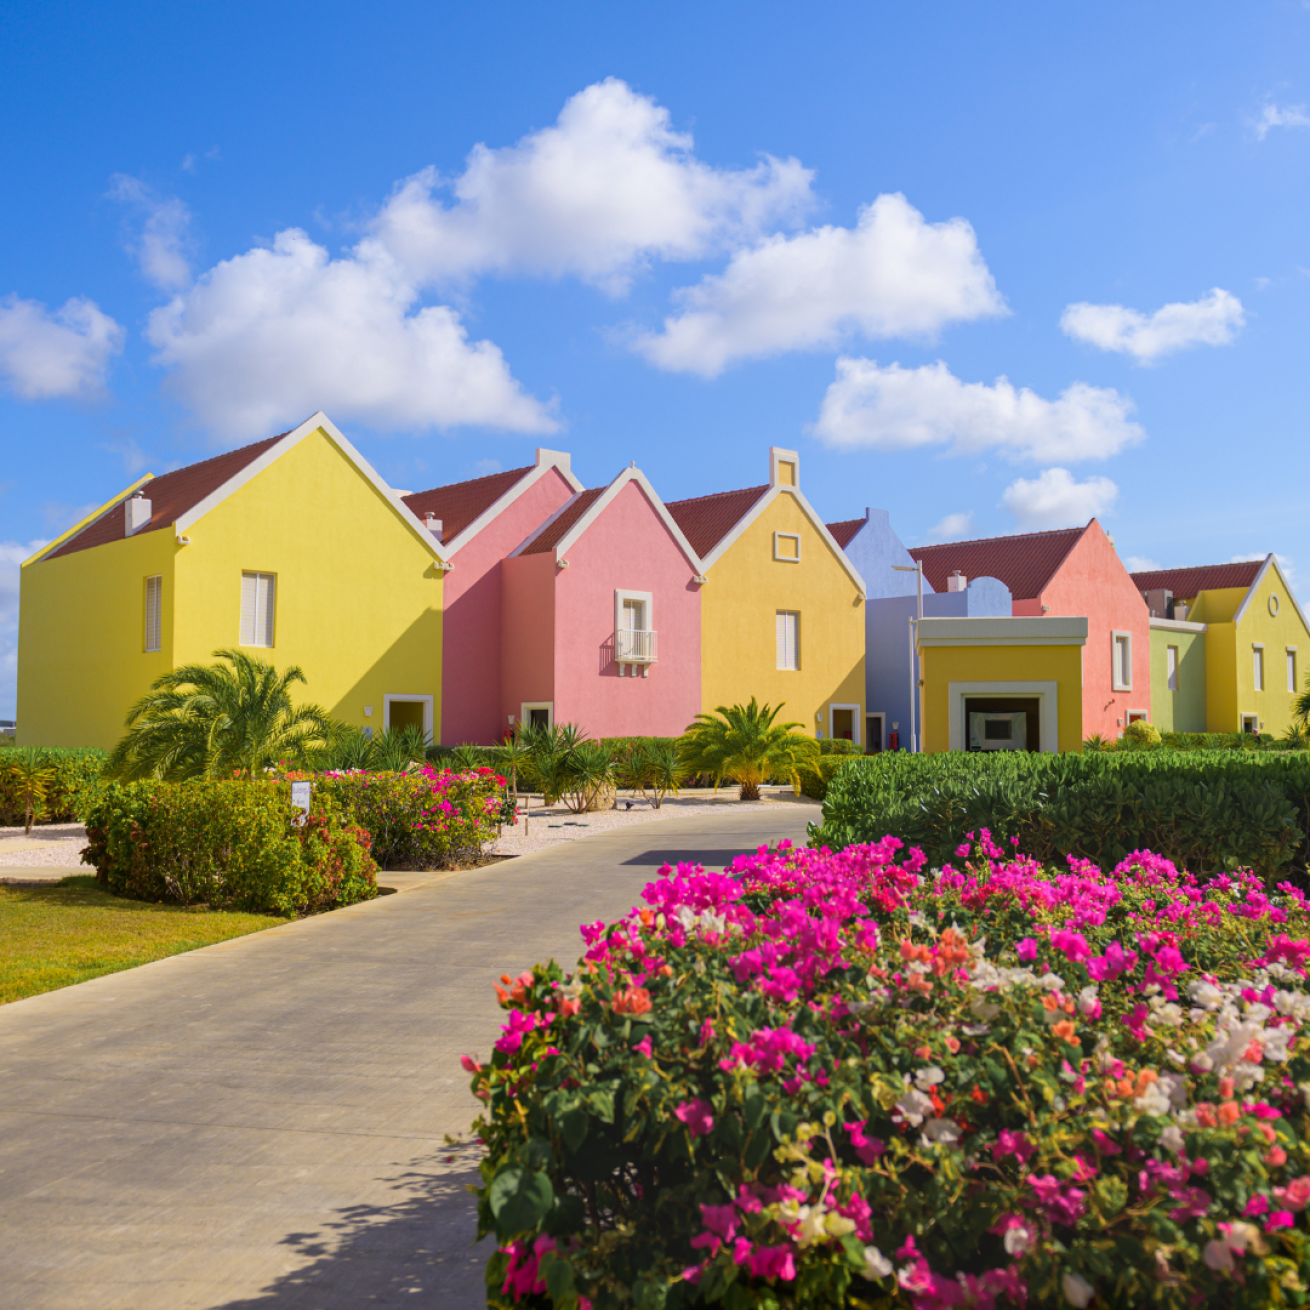 A row of colorful houses